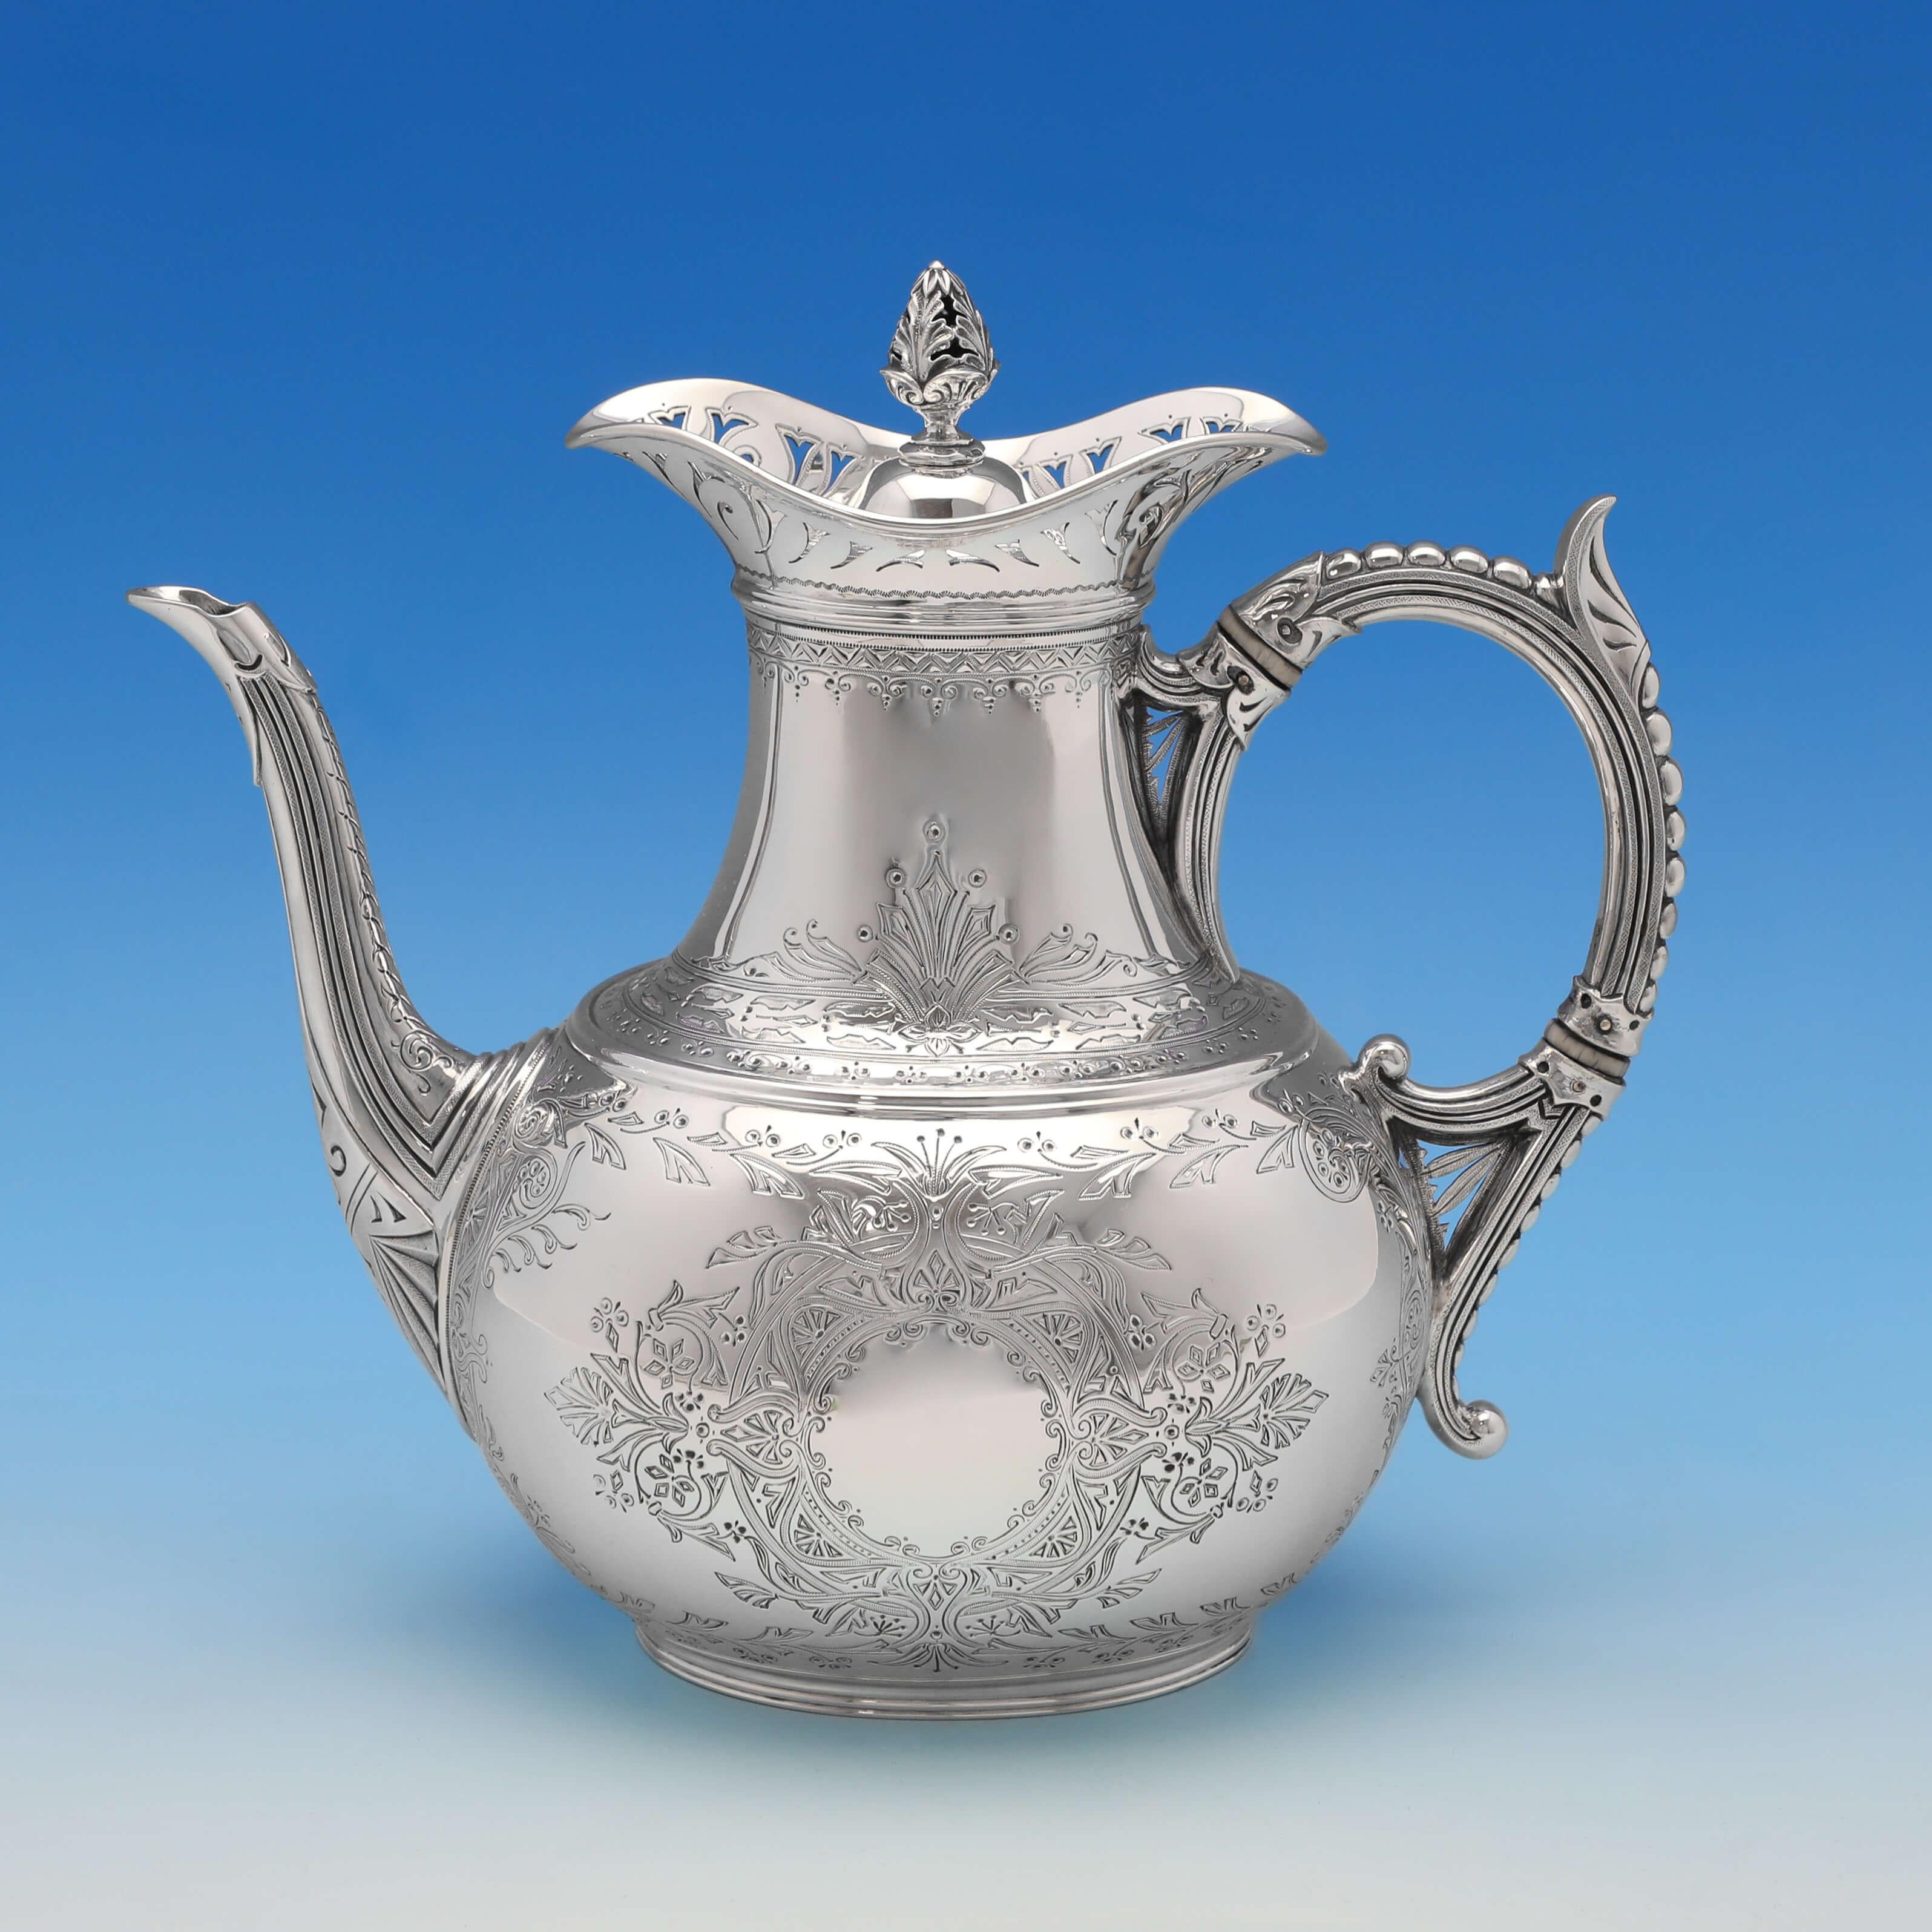 Hallmarked in London in 1888 by Elkington & Co., this very attractive, Victorian, antique sterling silver tea set, comprises a coffee pot, teapot, cream jug and sugar bowl, all featuring pierced borders to the top, striking engraved decoration, bead